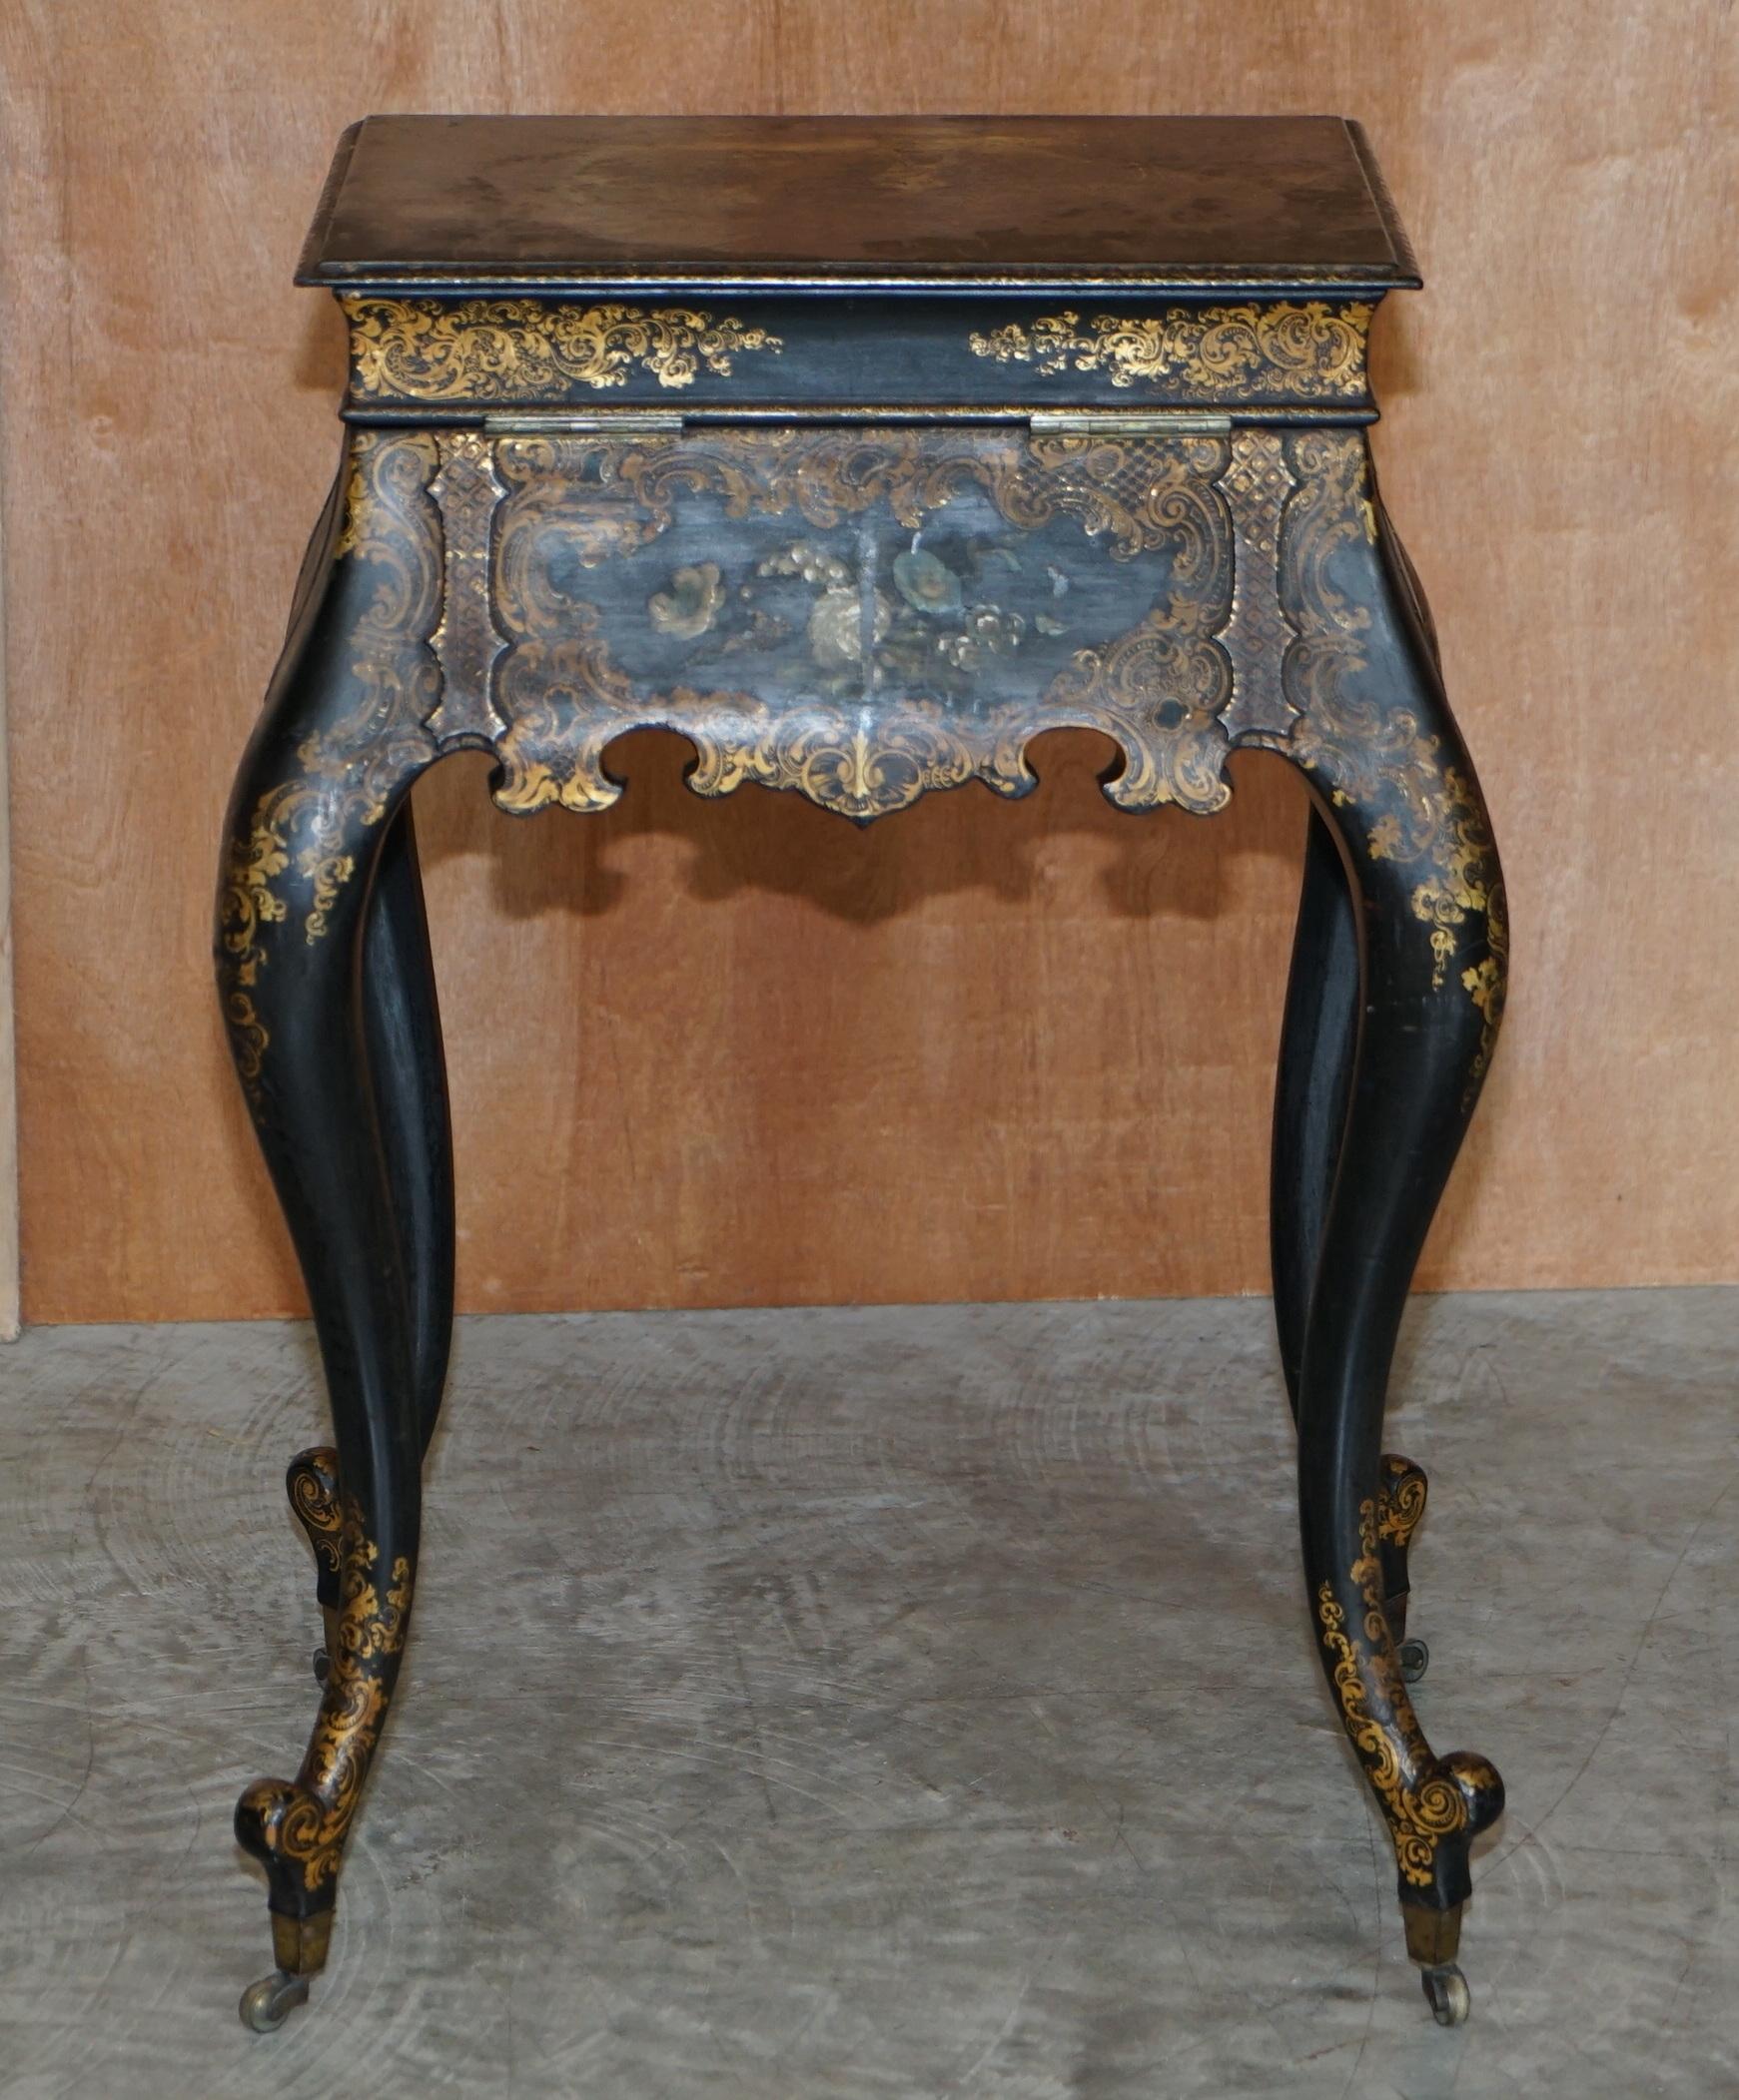 Georgian Antique circa 1800 George III Chinese Lacquer & Gold Gilt Work Table For Sale 7